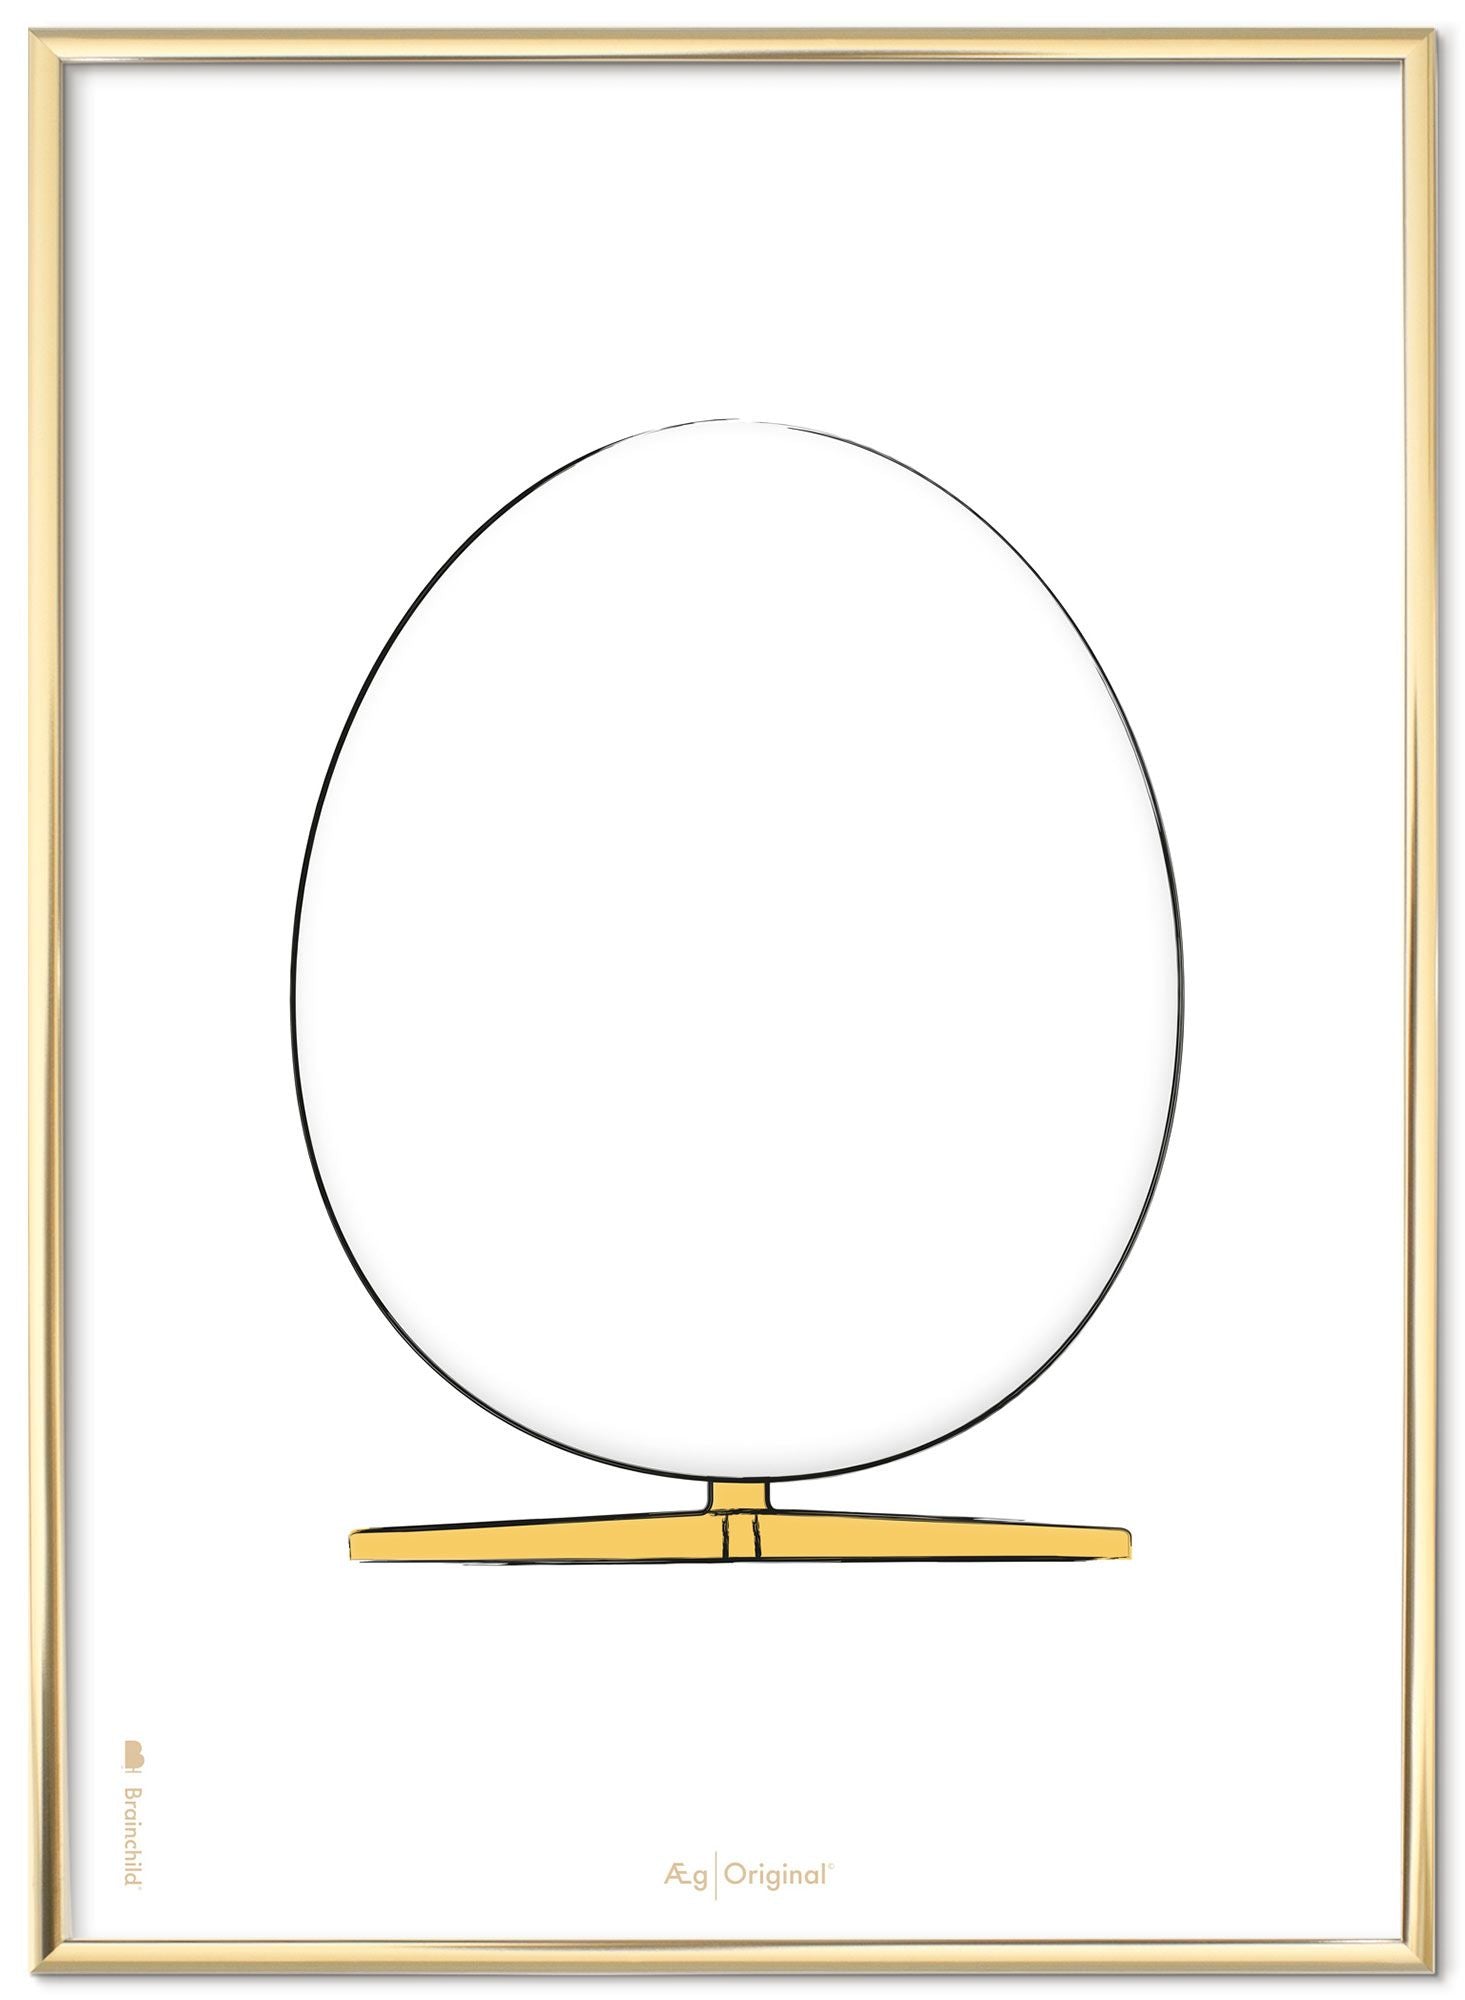 Brainchild The Egg Design Sketch Poster Frame Made Of Brass Colored Metal 50x70 Cm, White Background